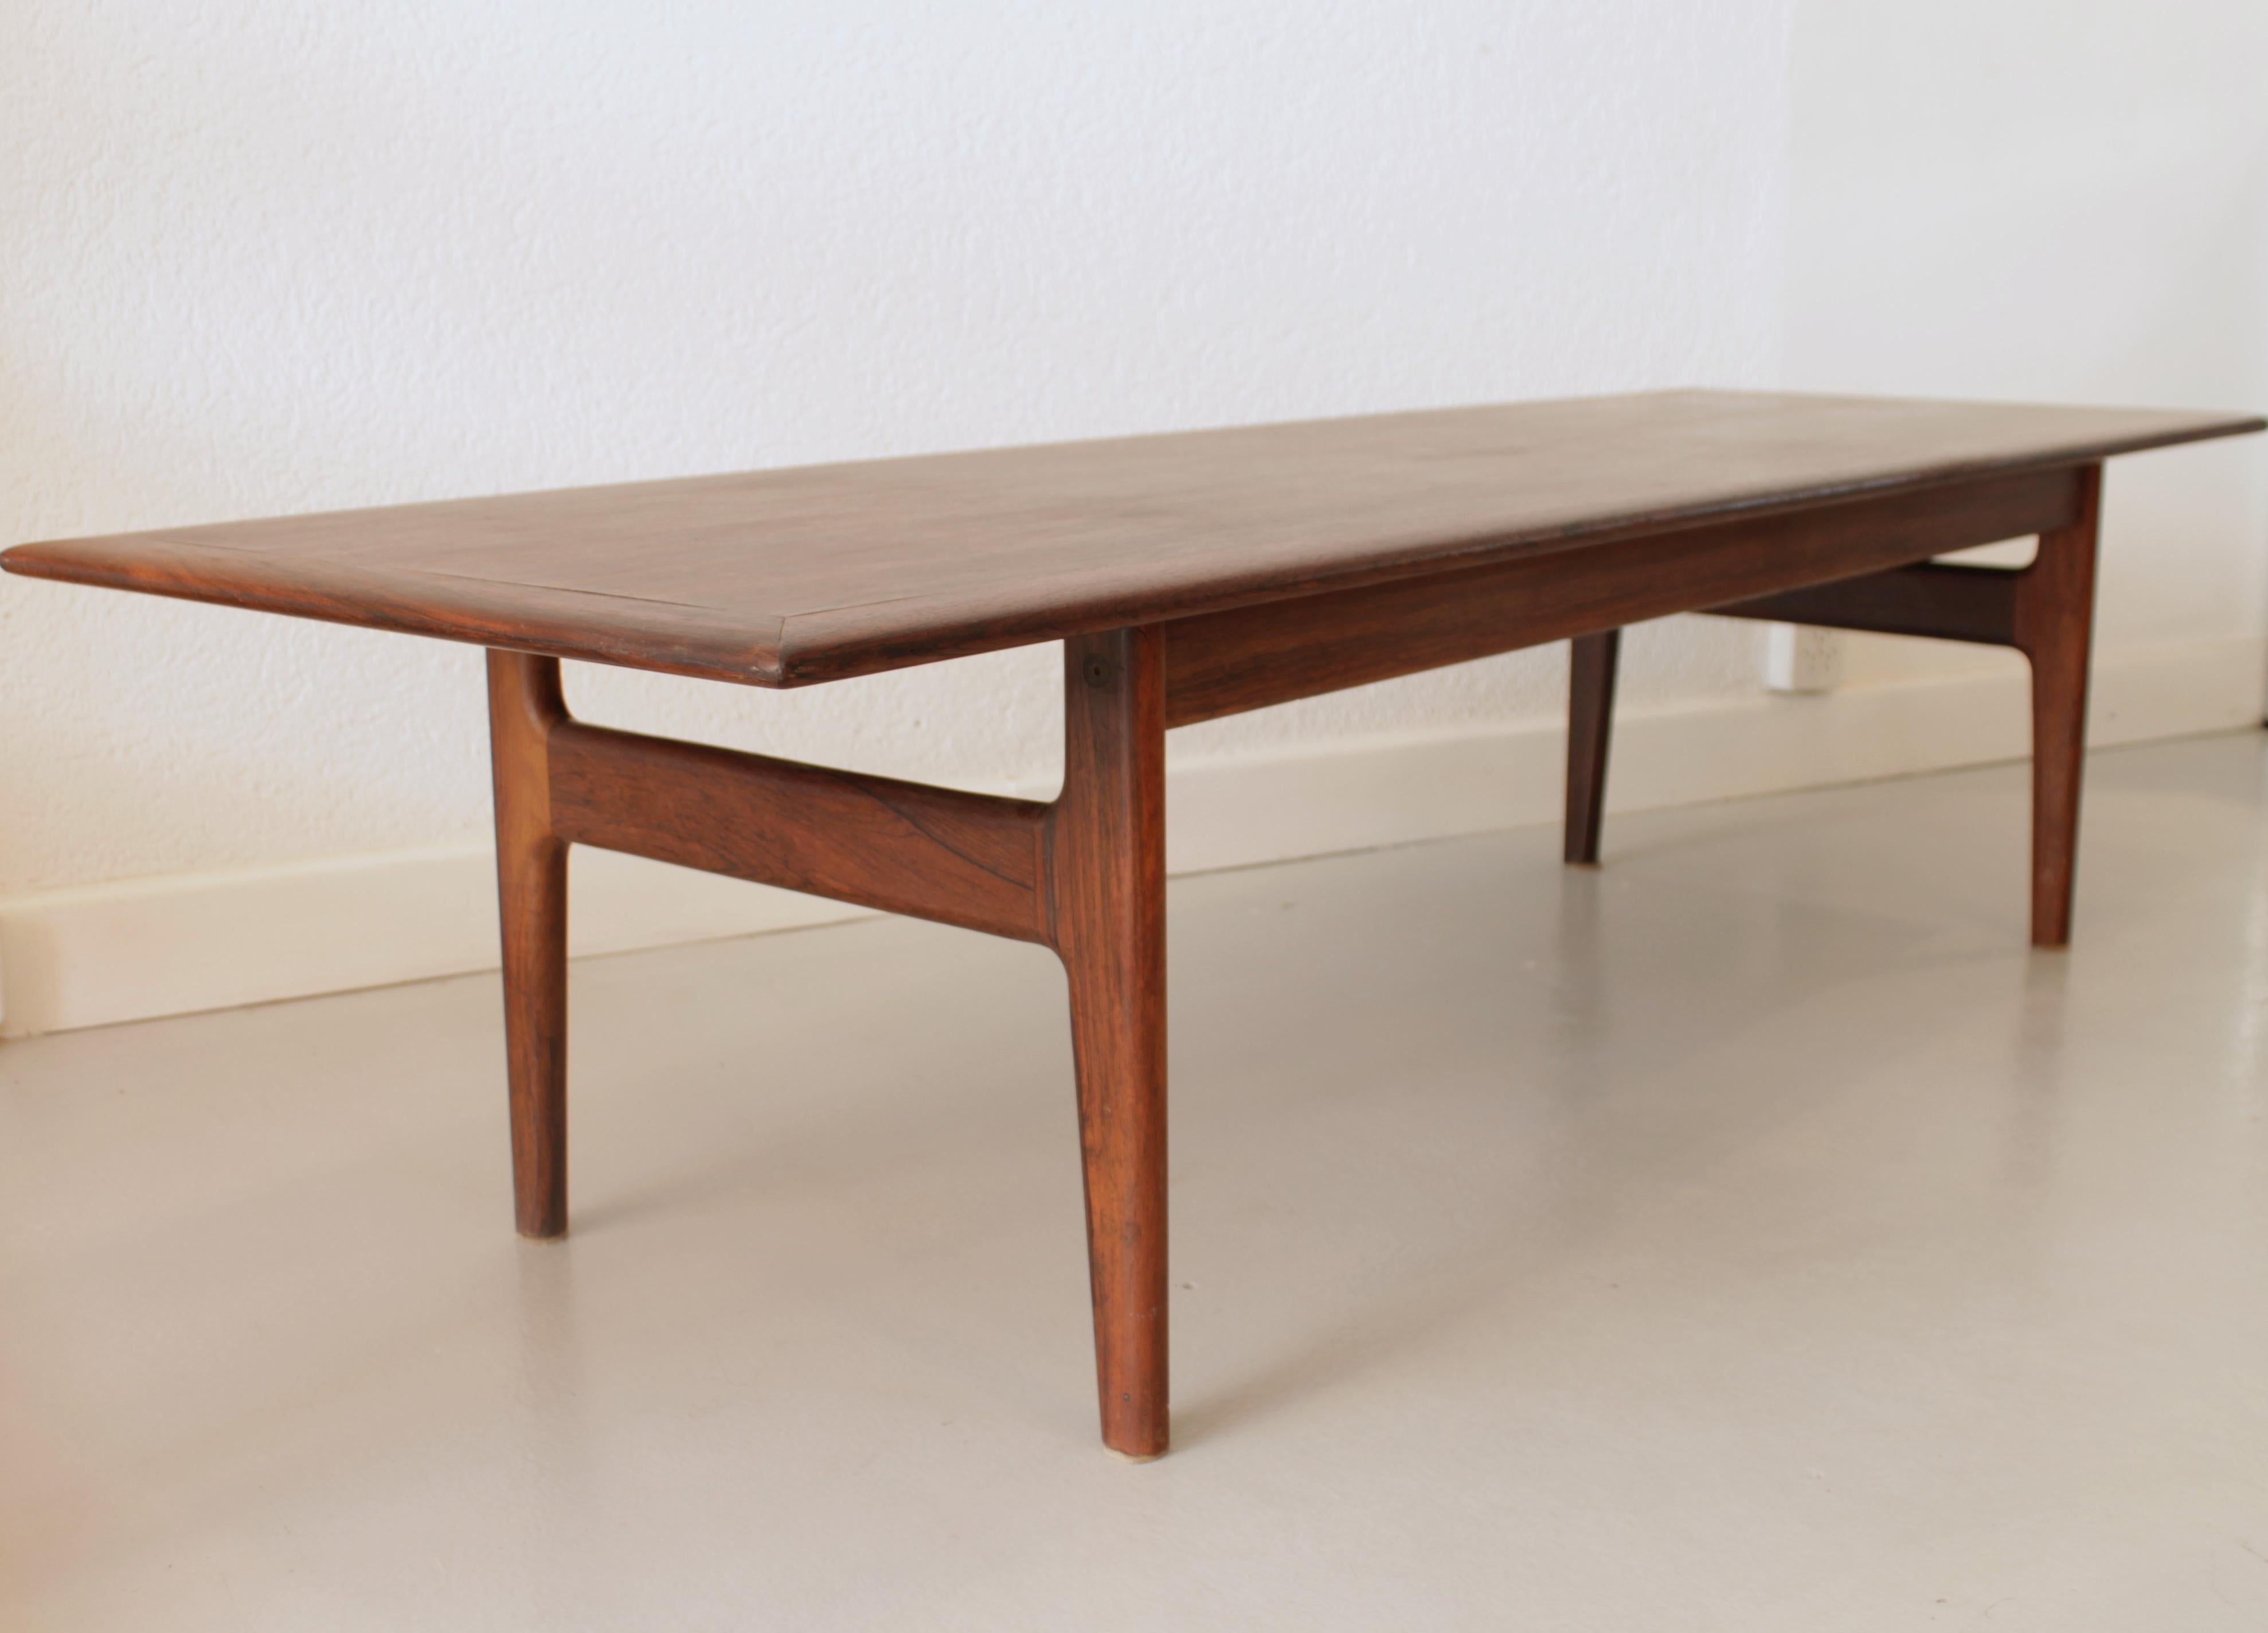 Long Rio rosewood coffee table produced by Christensen Silkeborg, Denmark, circa 1960
Manufacture label.